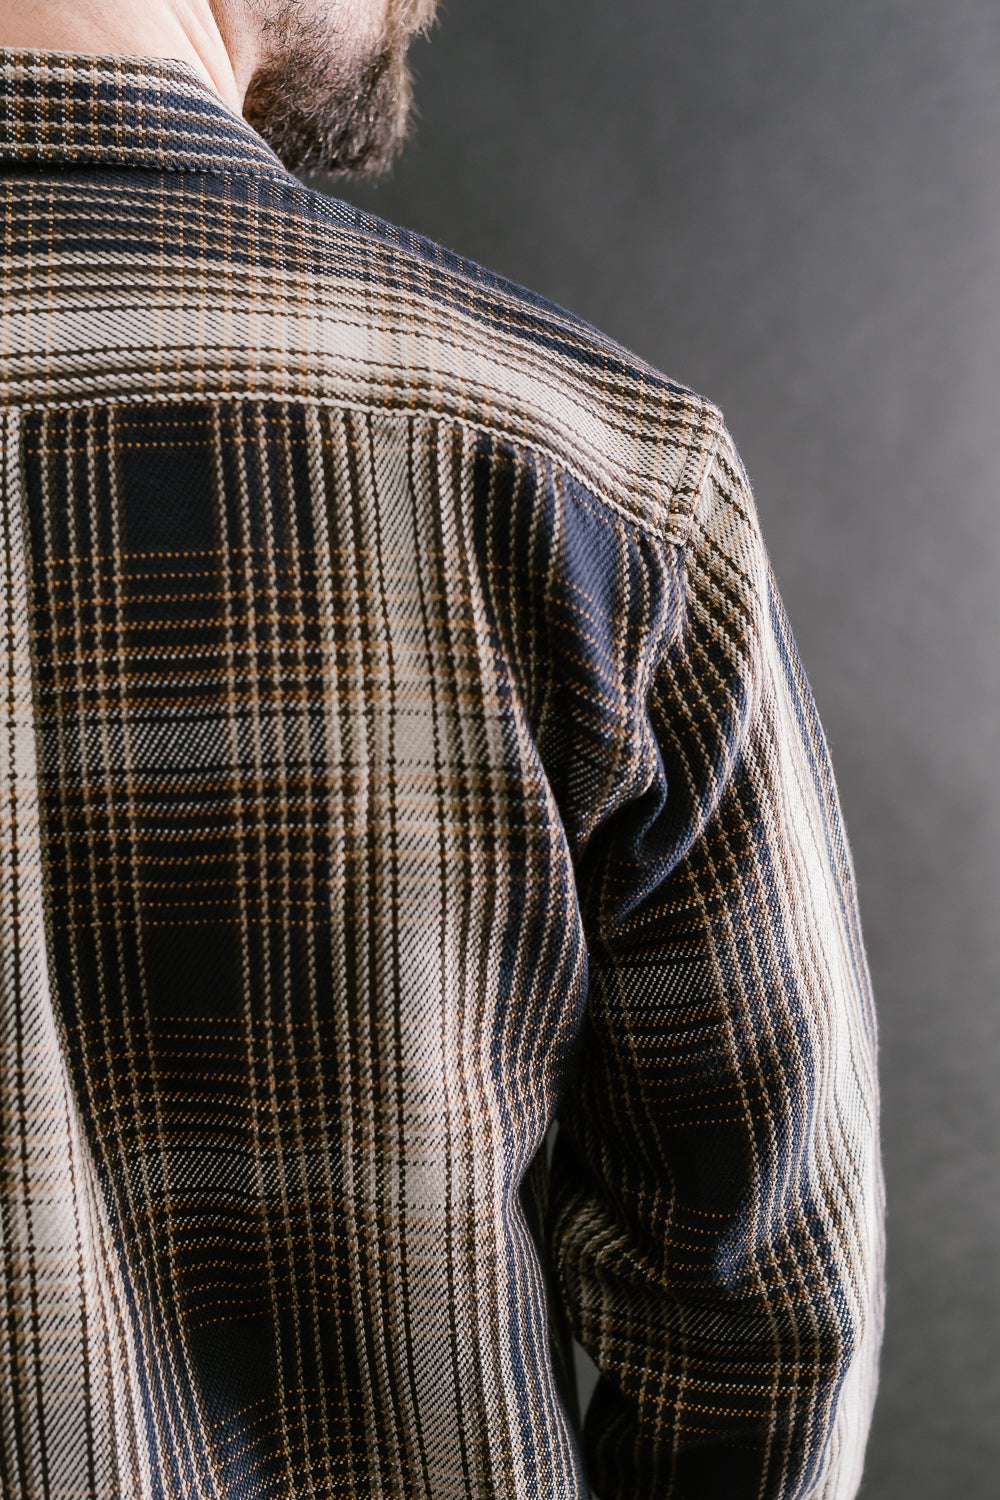 Webster Shirt Twill Check - Navy, White, Yellow, Brown